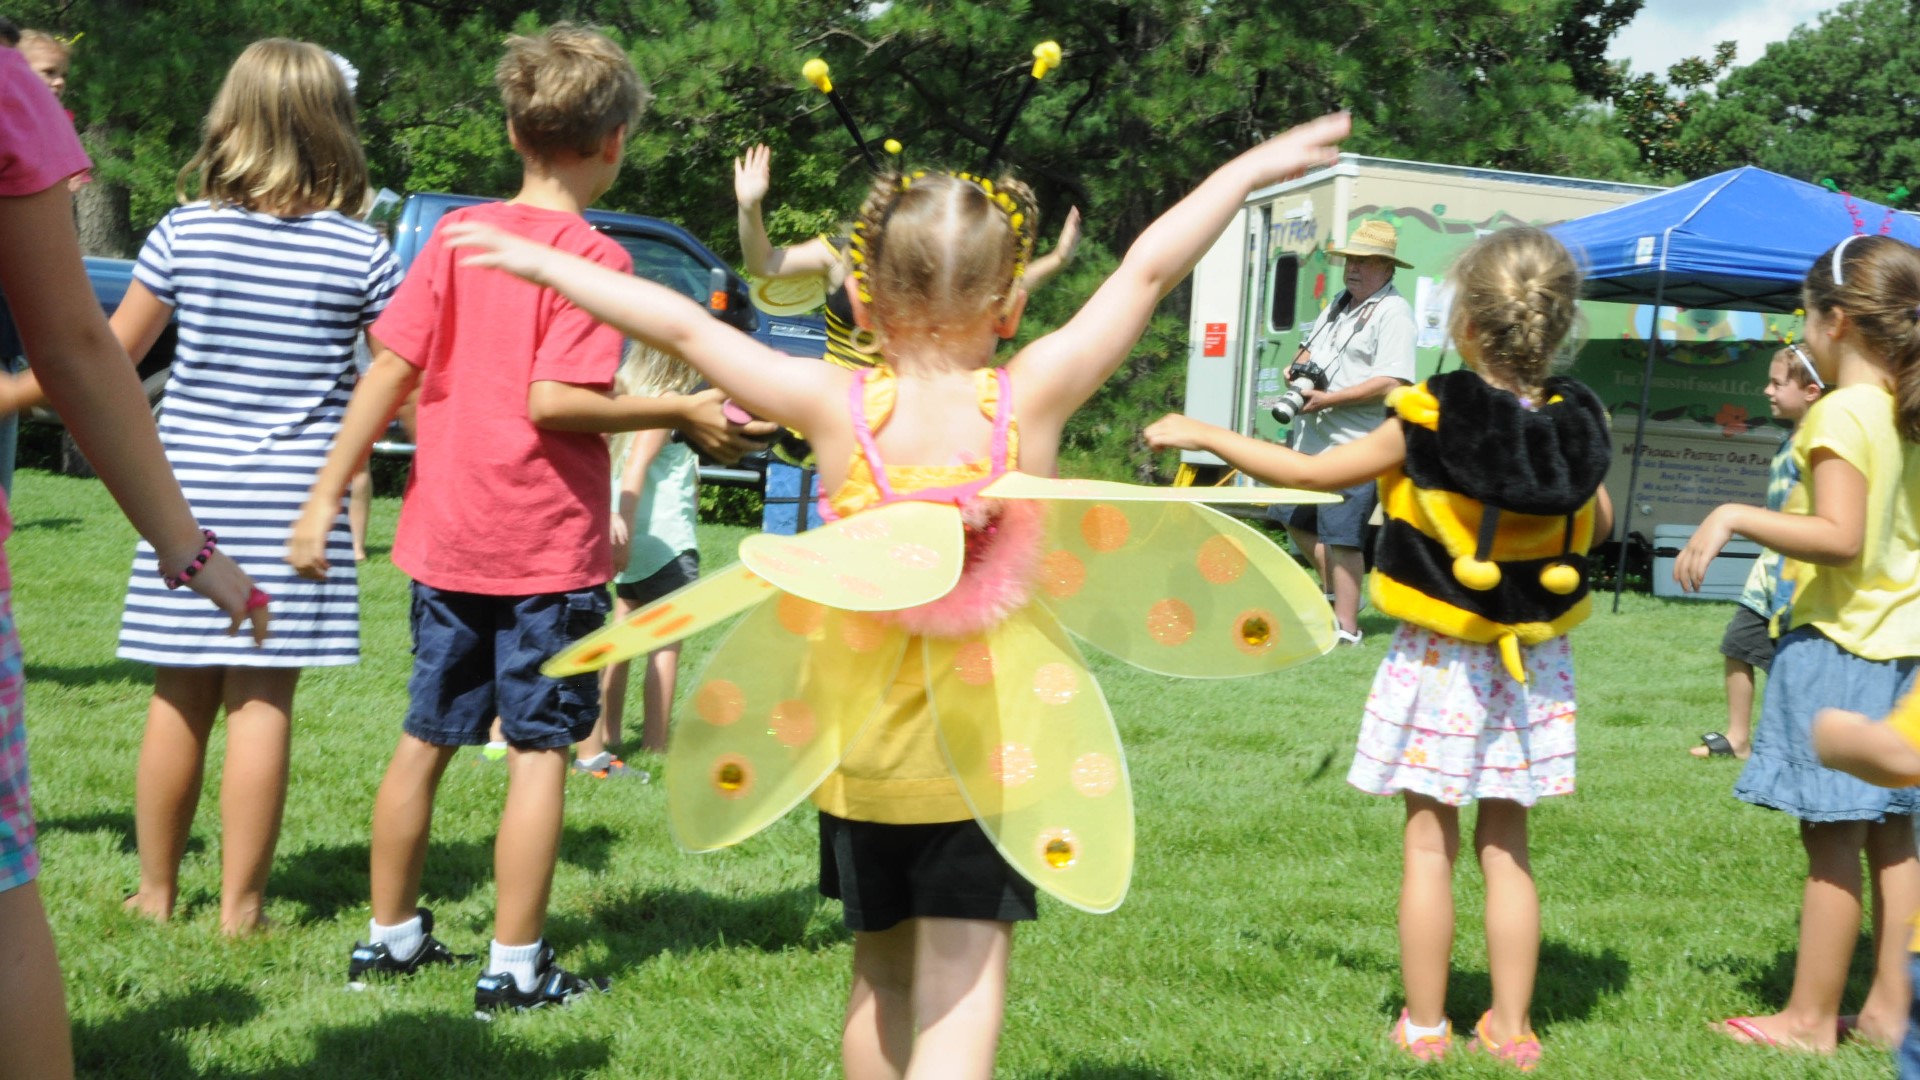 Buzzzz out at the 9th Annual Virginia Honey Bee Festival this weekend